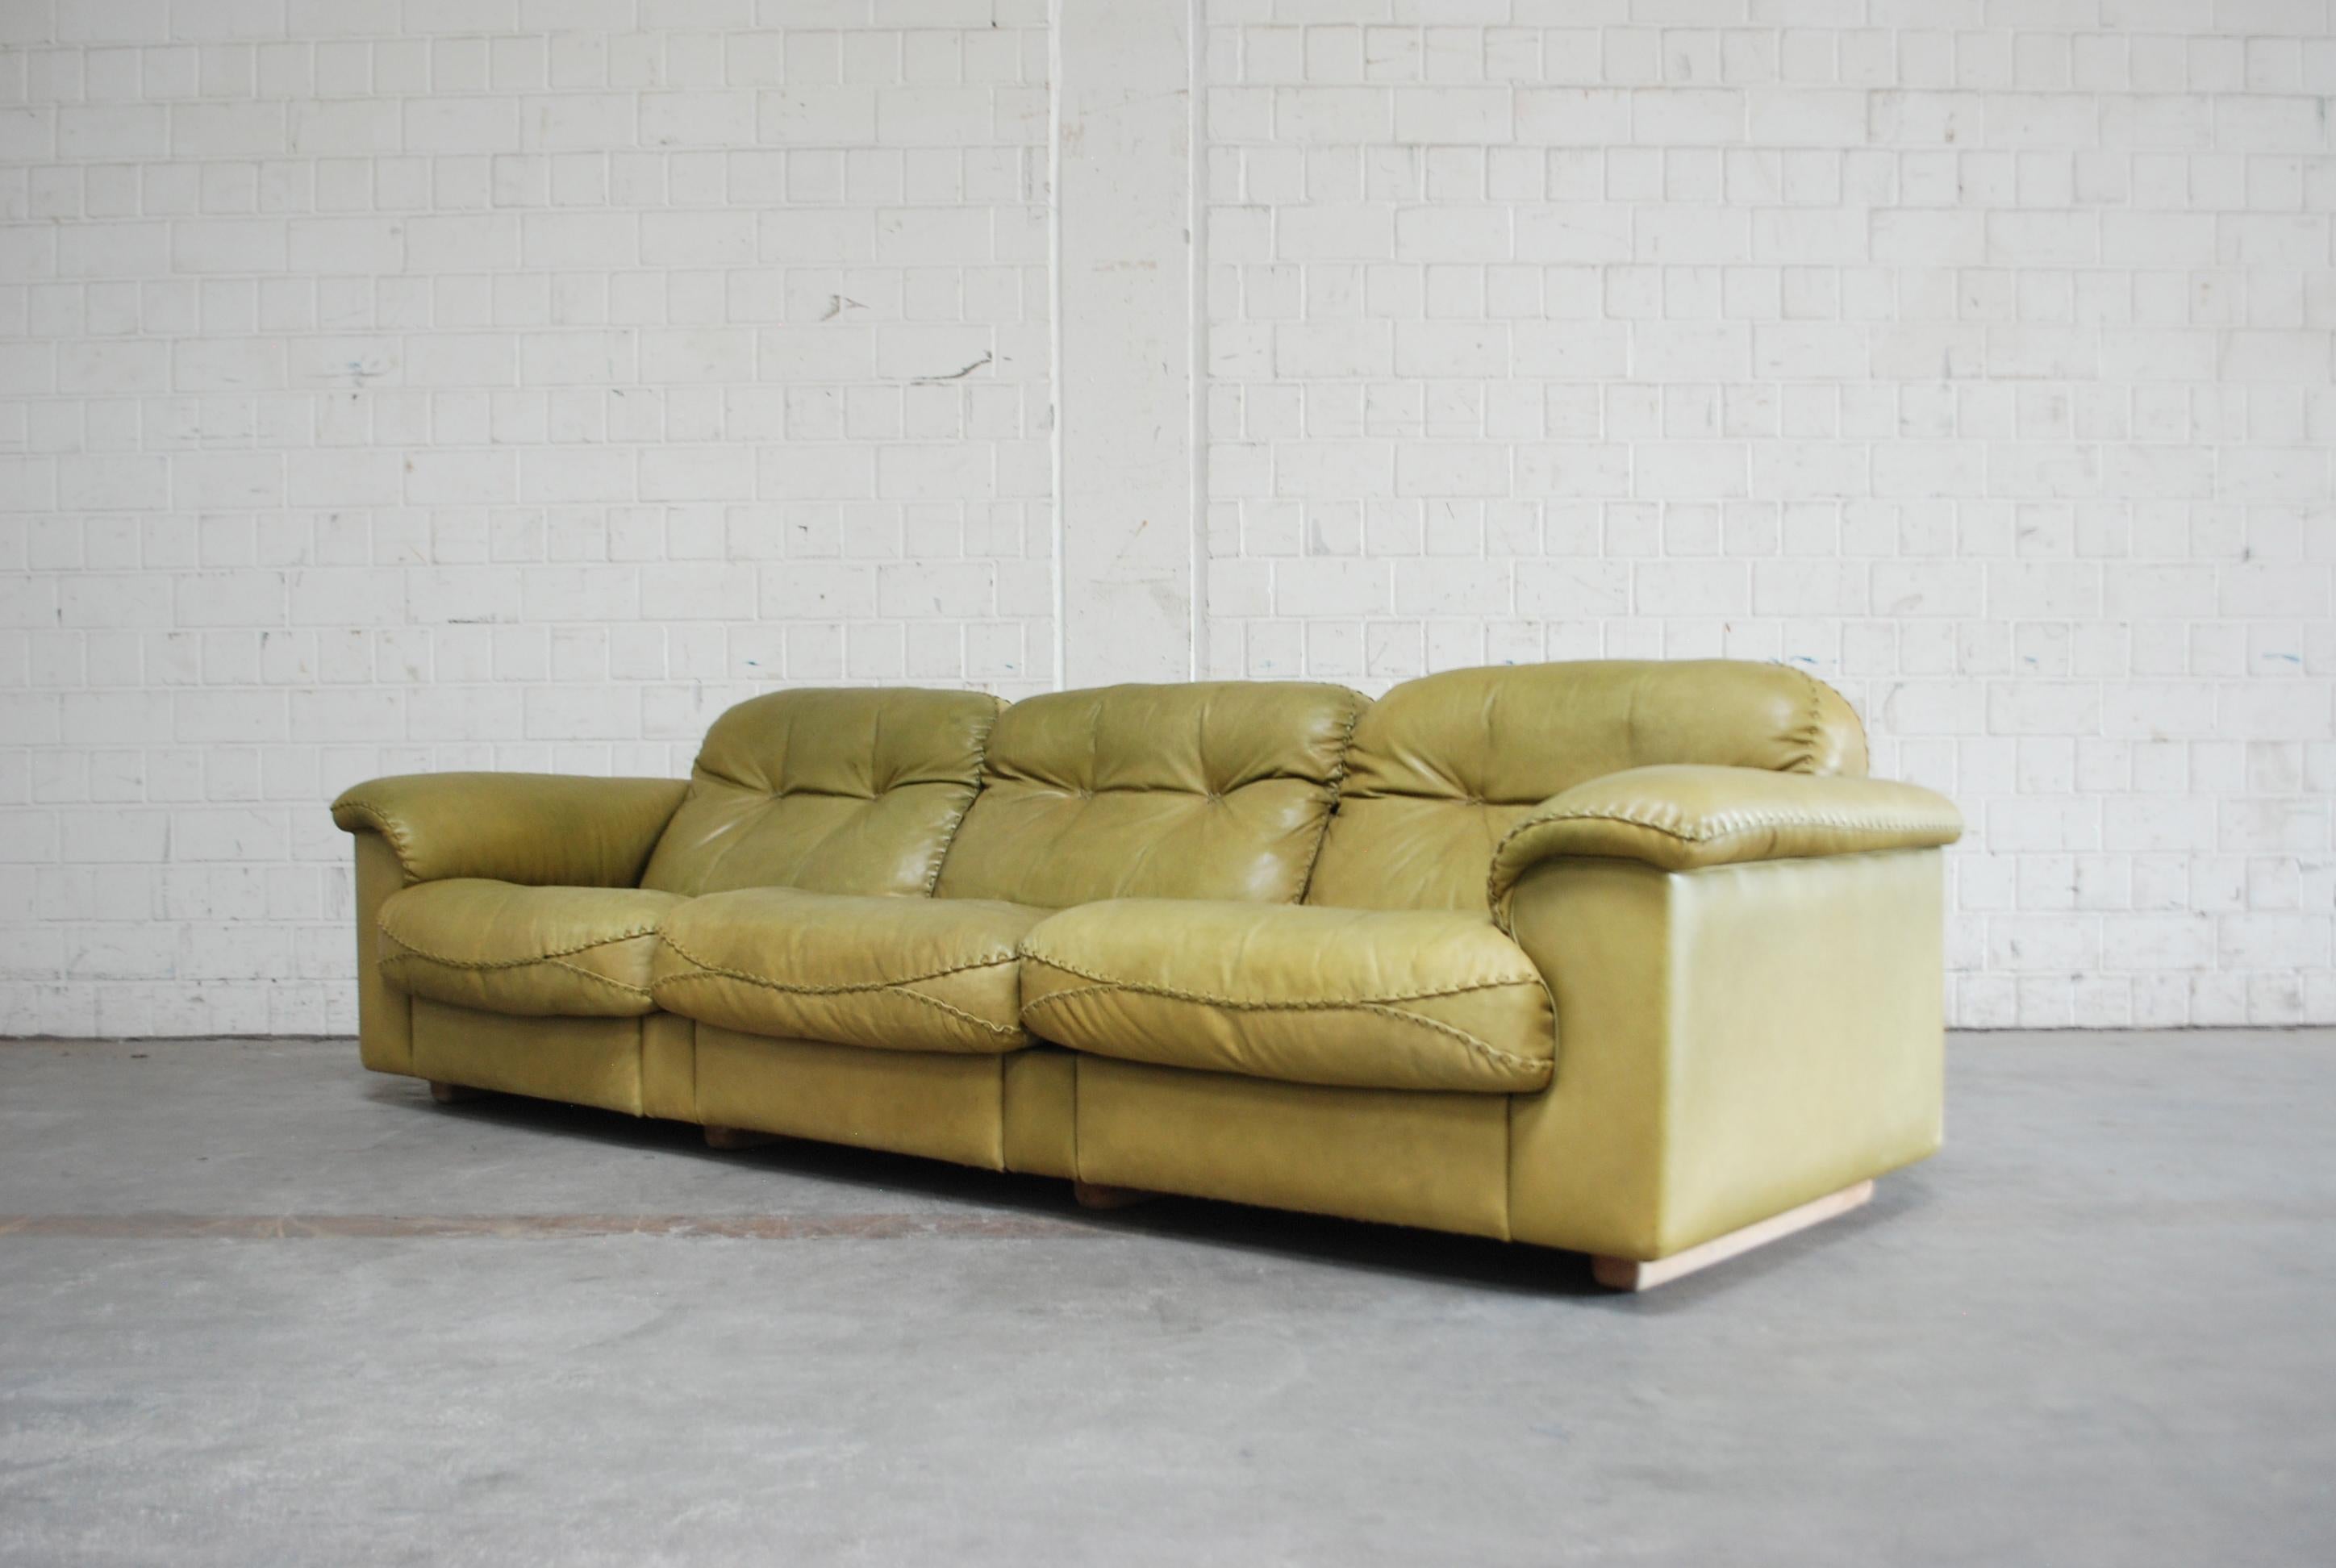 De Sede leather sofa DS 101.
Aniline leather in olive green.
Great comfort with an extendable seat for much more lounge comfort.
Known from the James Bond movie 